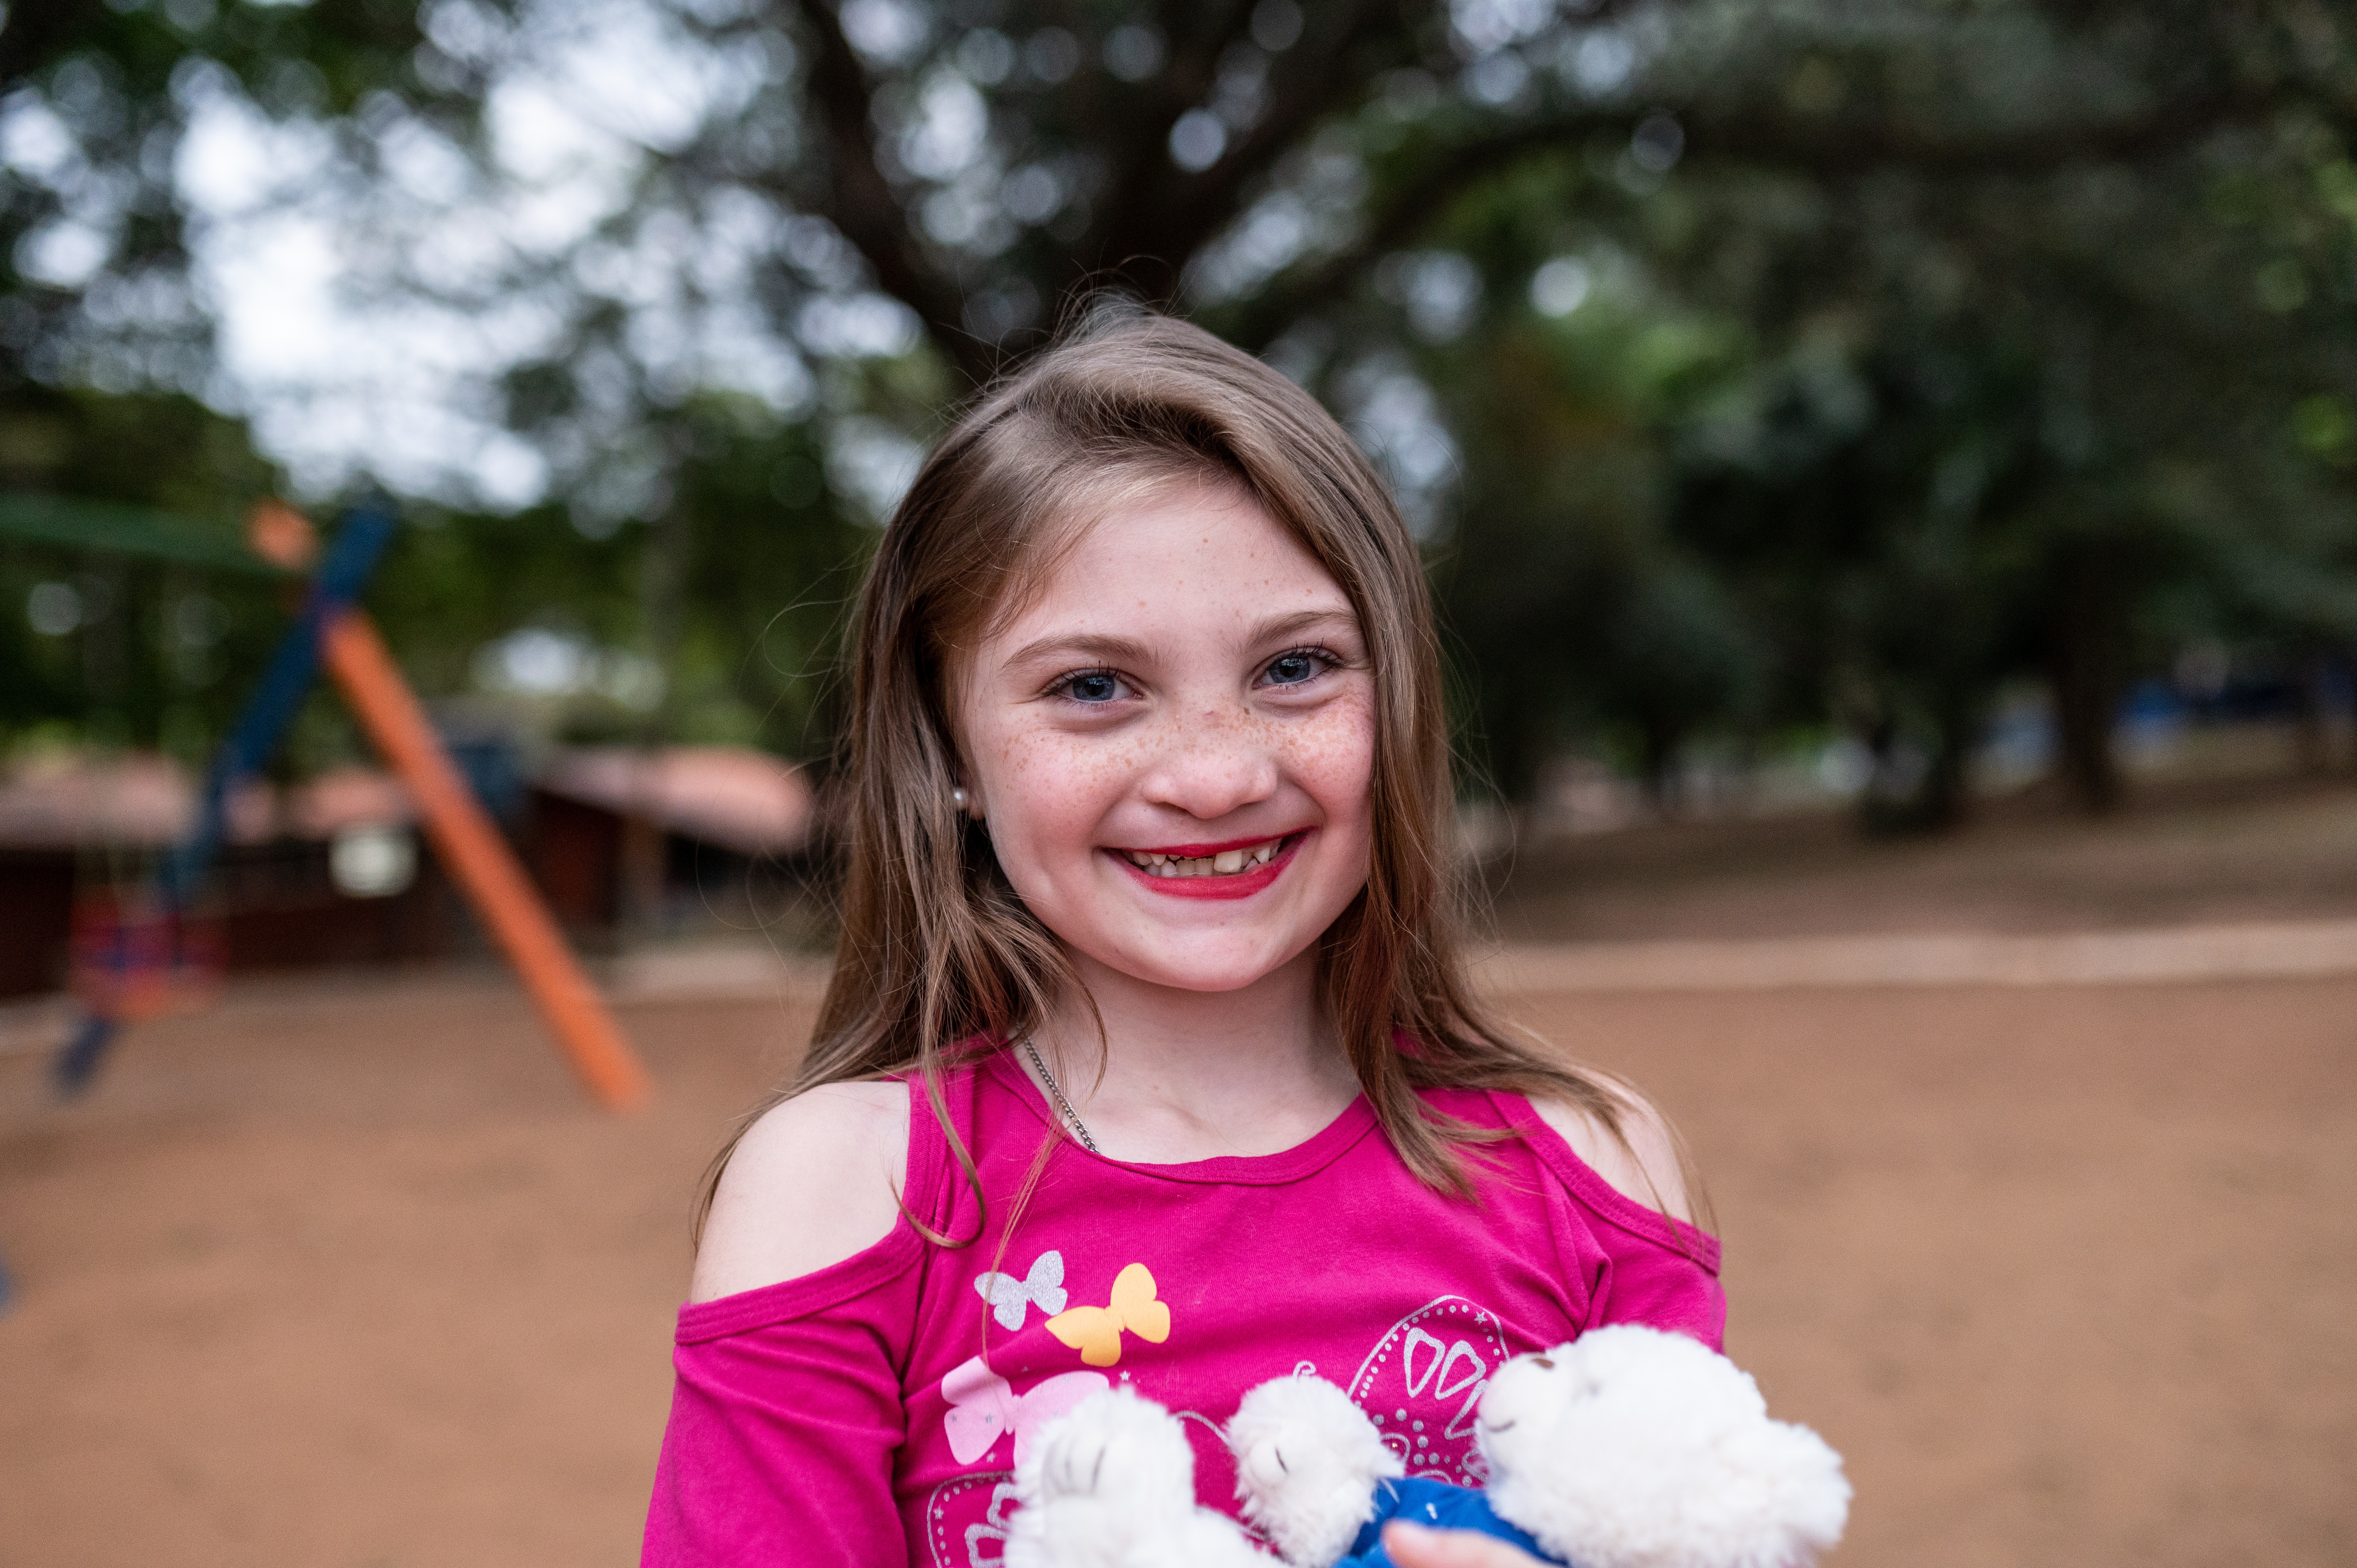 Milena smiling on the playground and holding a white teddy bear